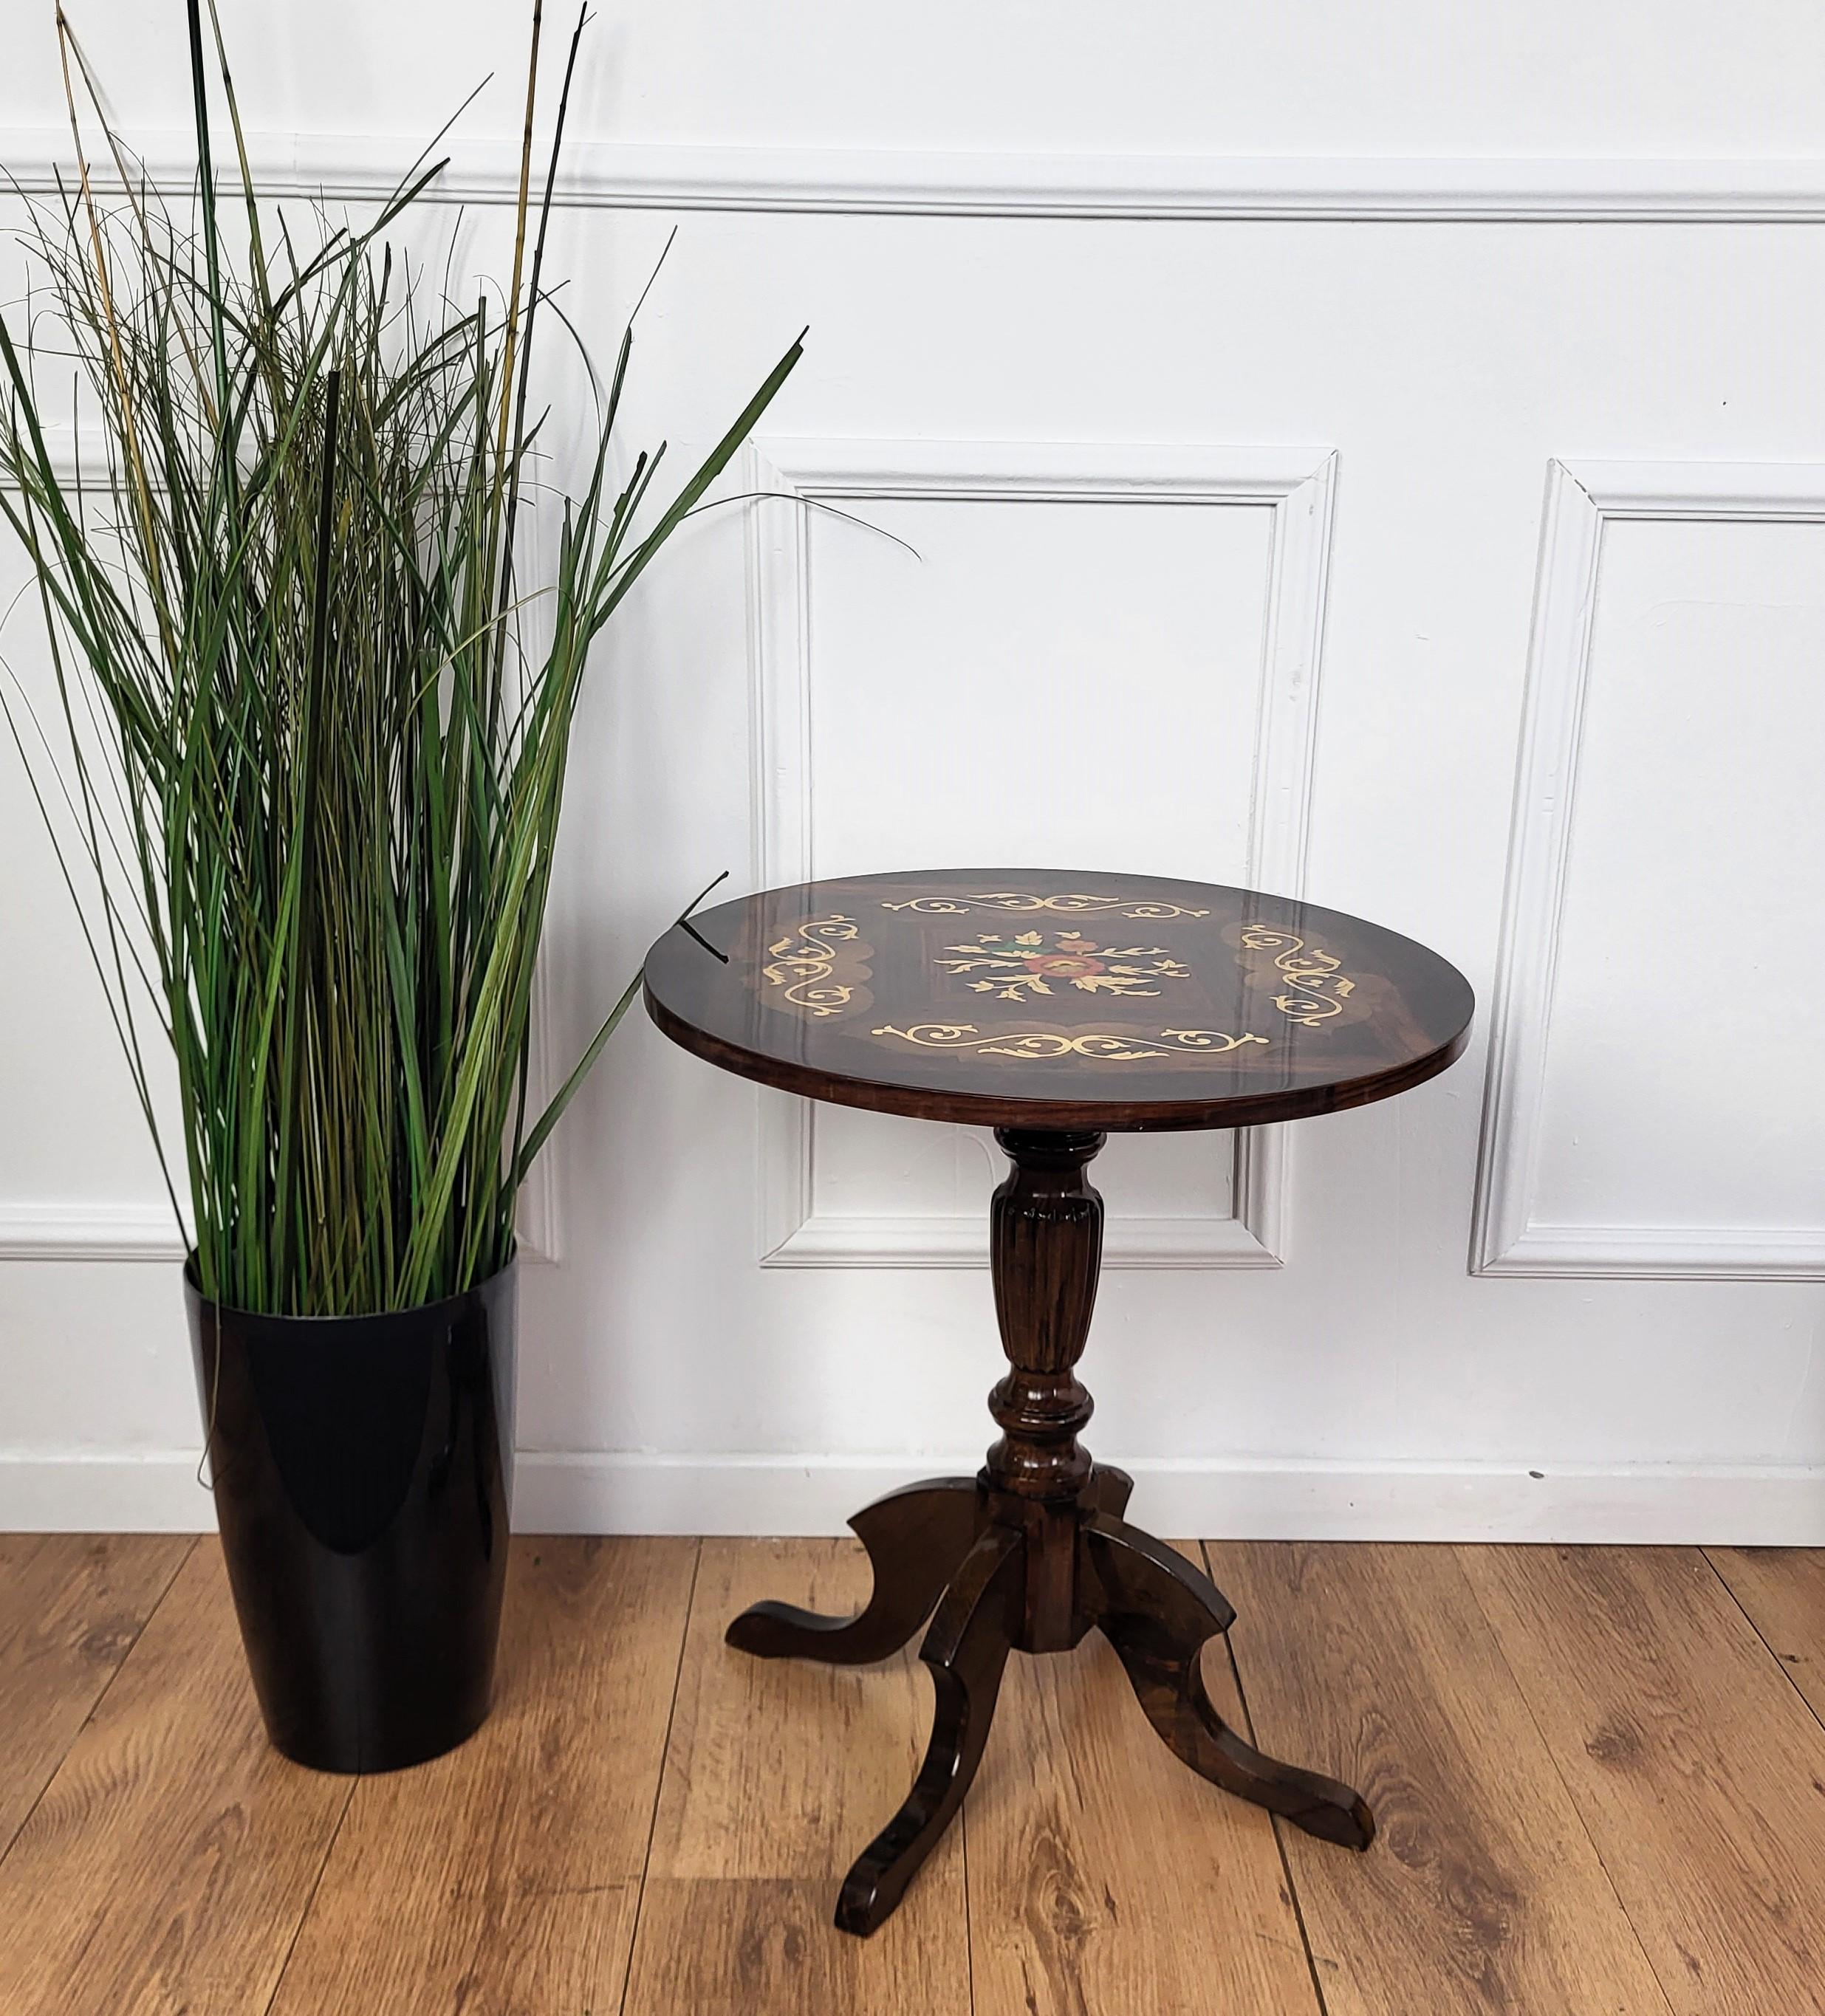 A beautiful Italian round side table with great details and frames shaped in Victorian, Napoleon III, Louis XV style with beautiful inlay decors in classic figures on the top astanding on tripod feet legs. A very elegant, modern and classic piece